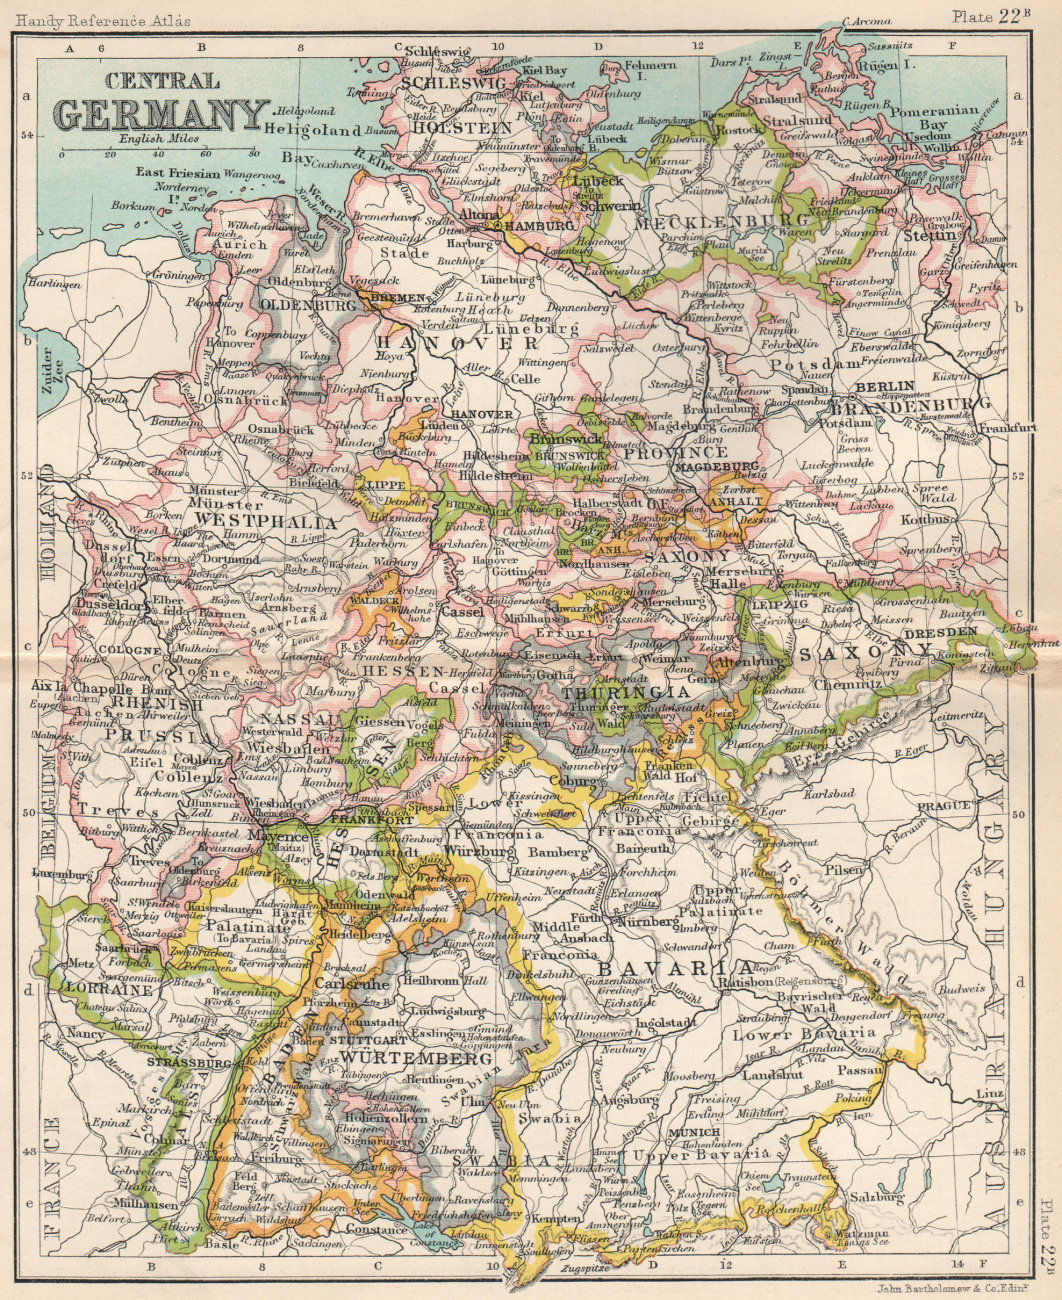 Associate Product Central Germany showing states. BARTHOLOMEW 1904 old antique map plan chart